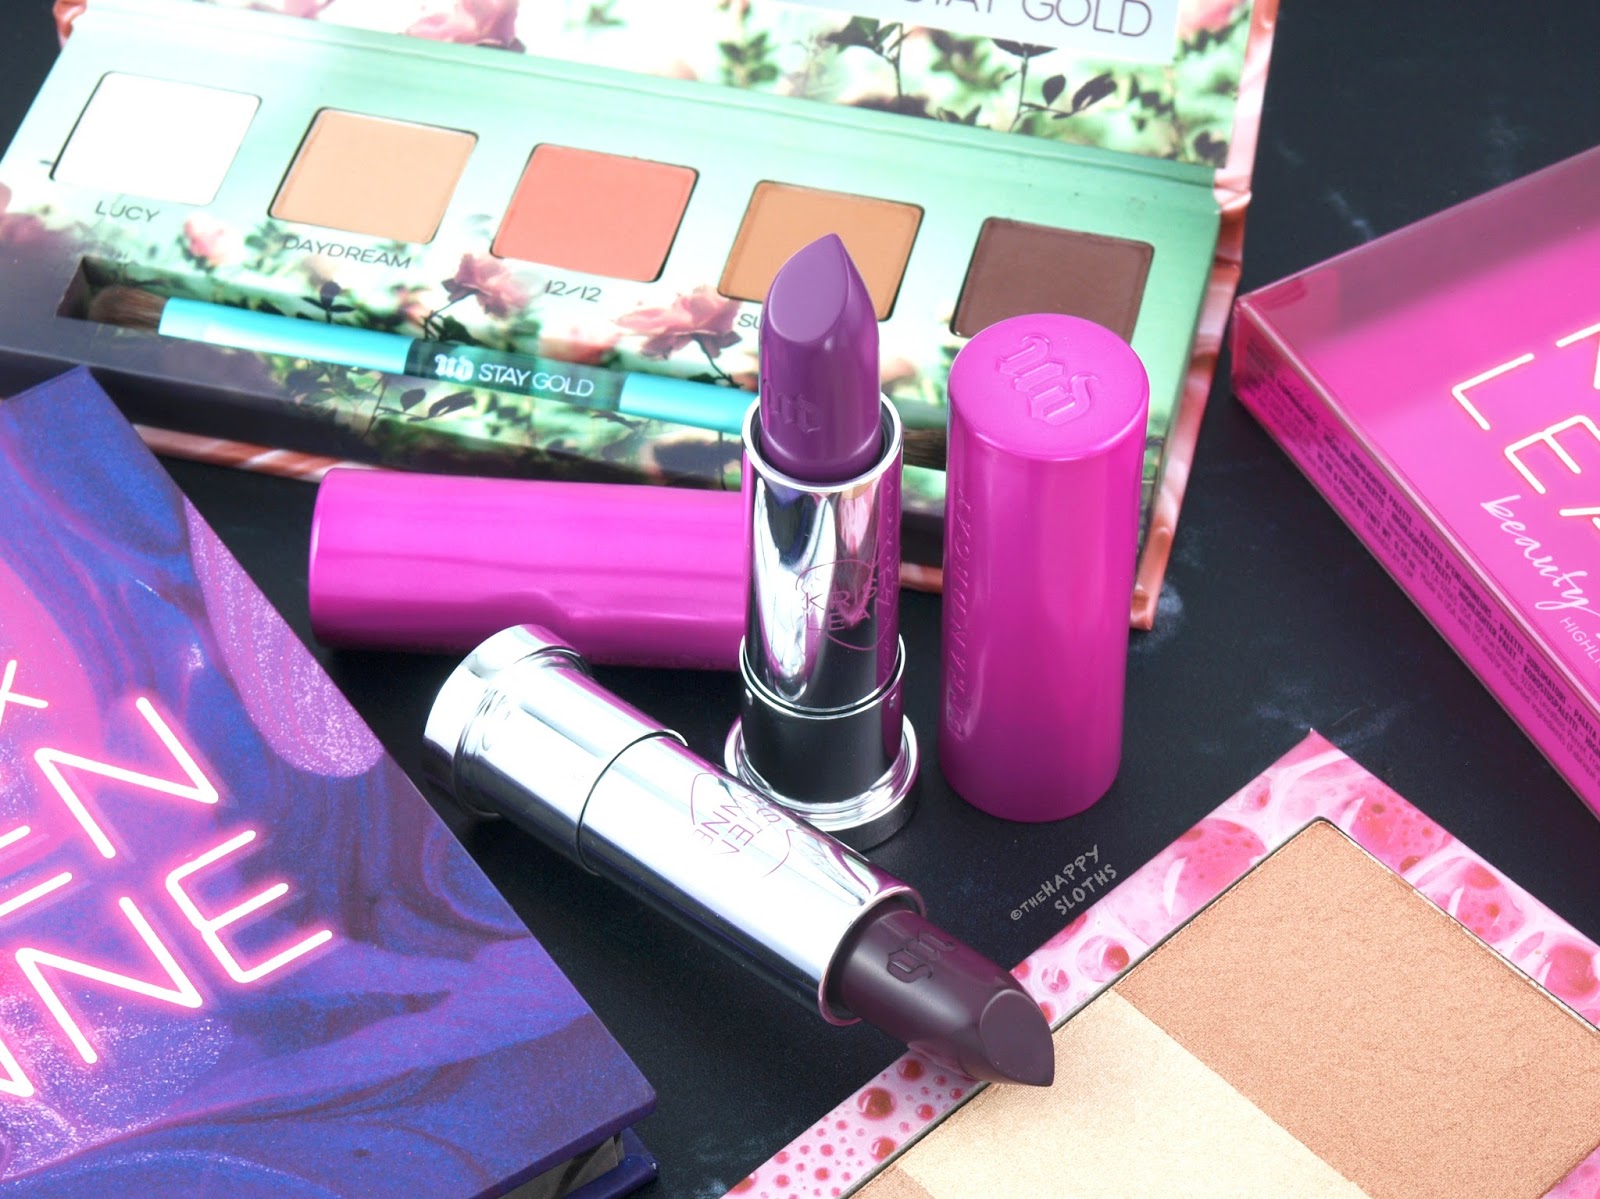 Urban Decay x Kristen Leanne Vice Lipstick: Review and Swatches